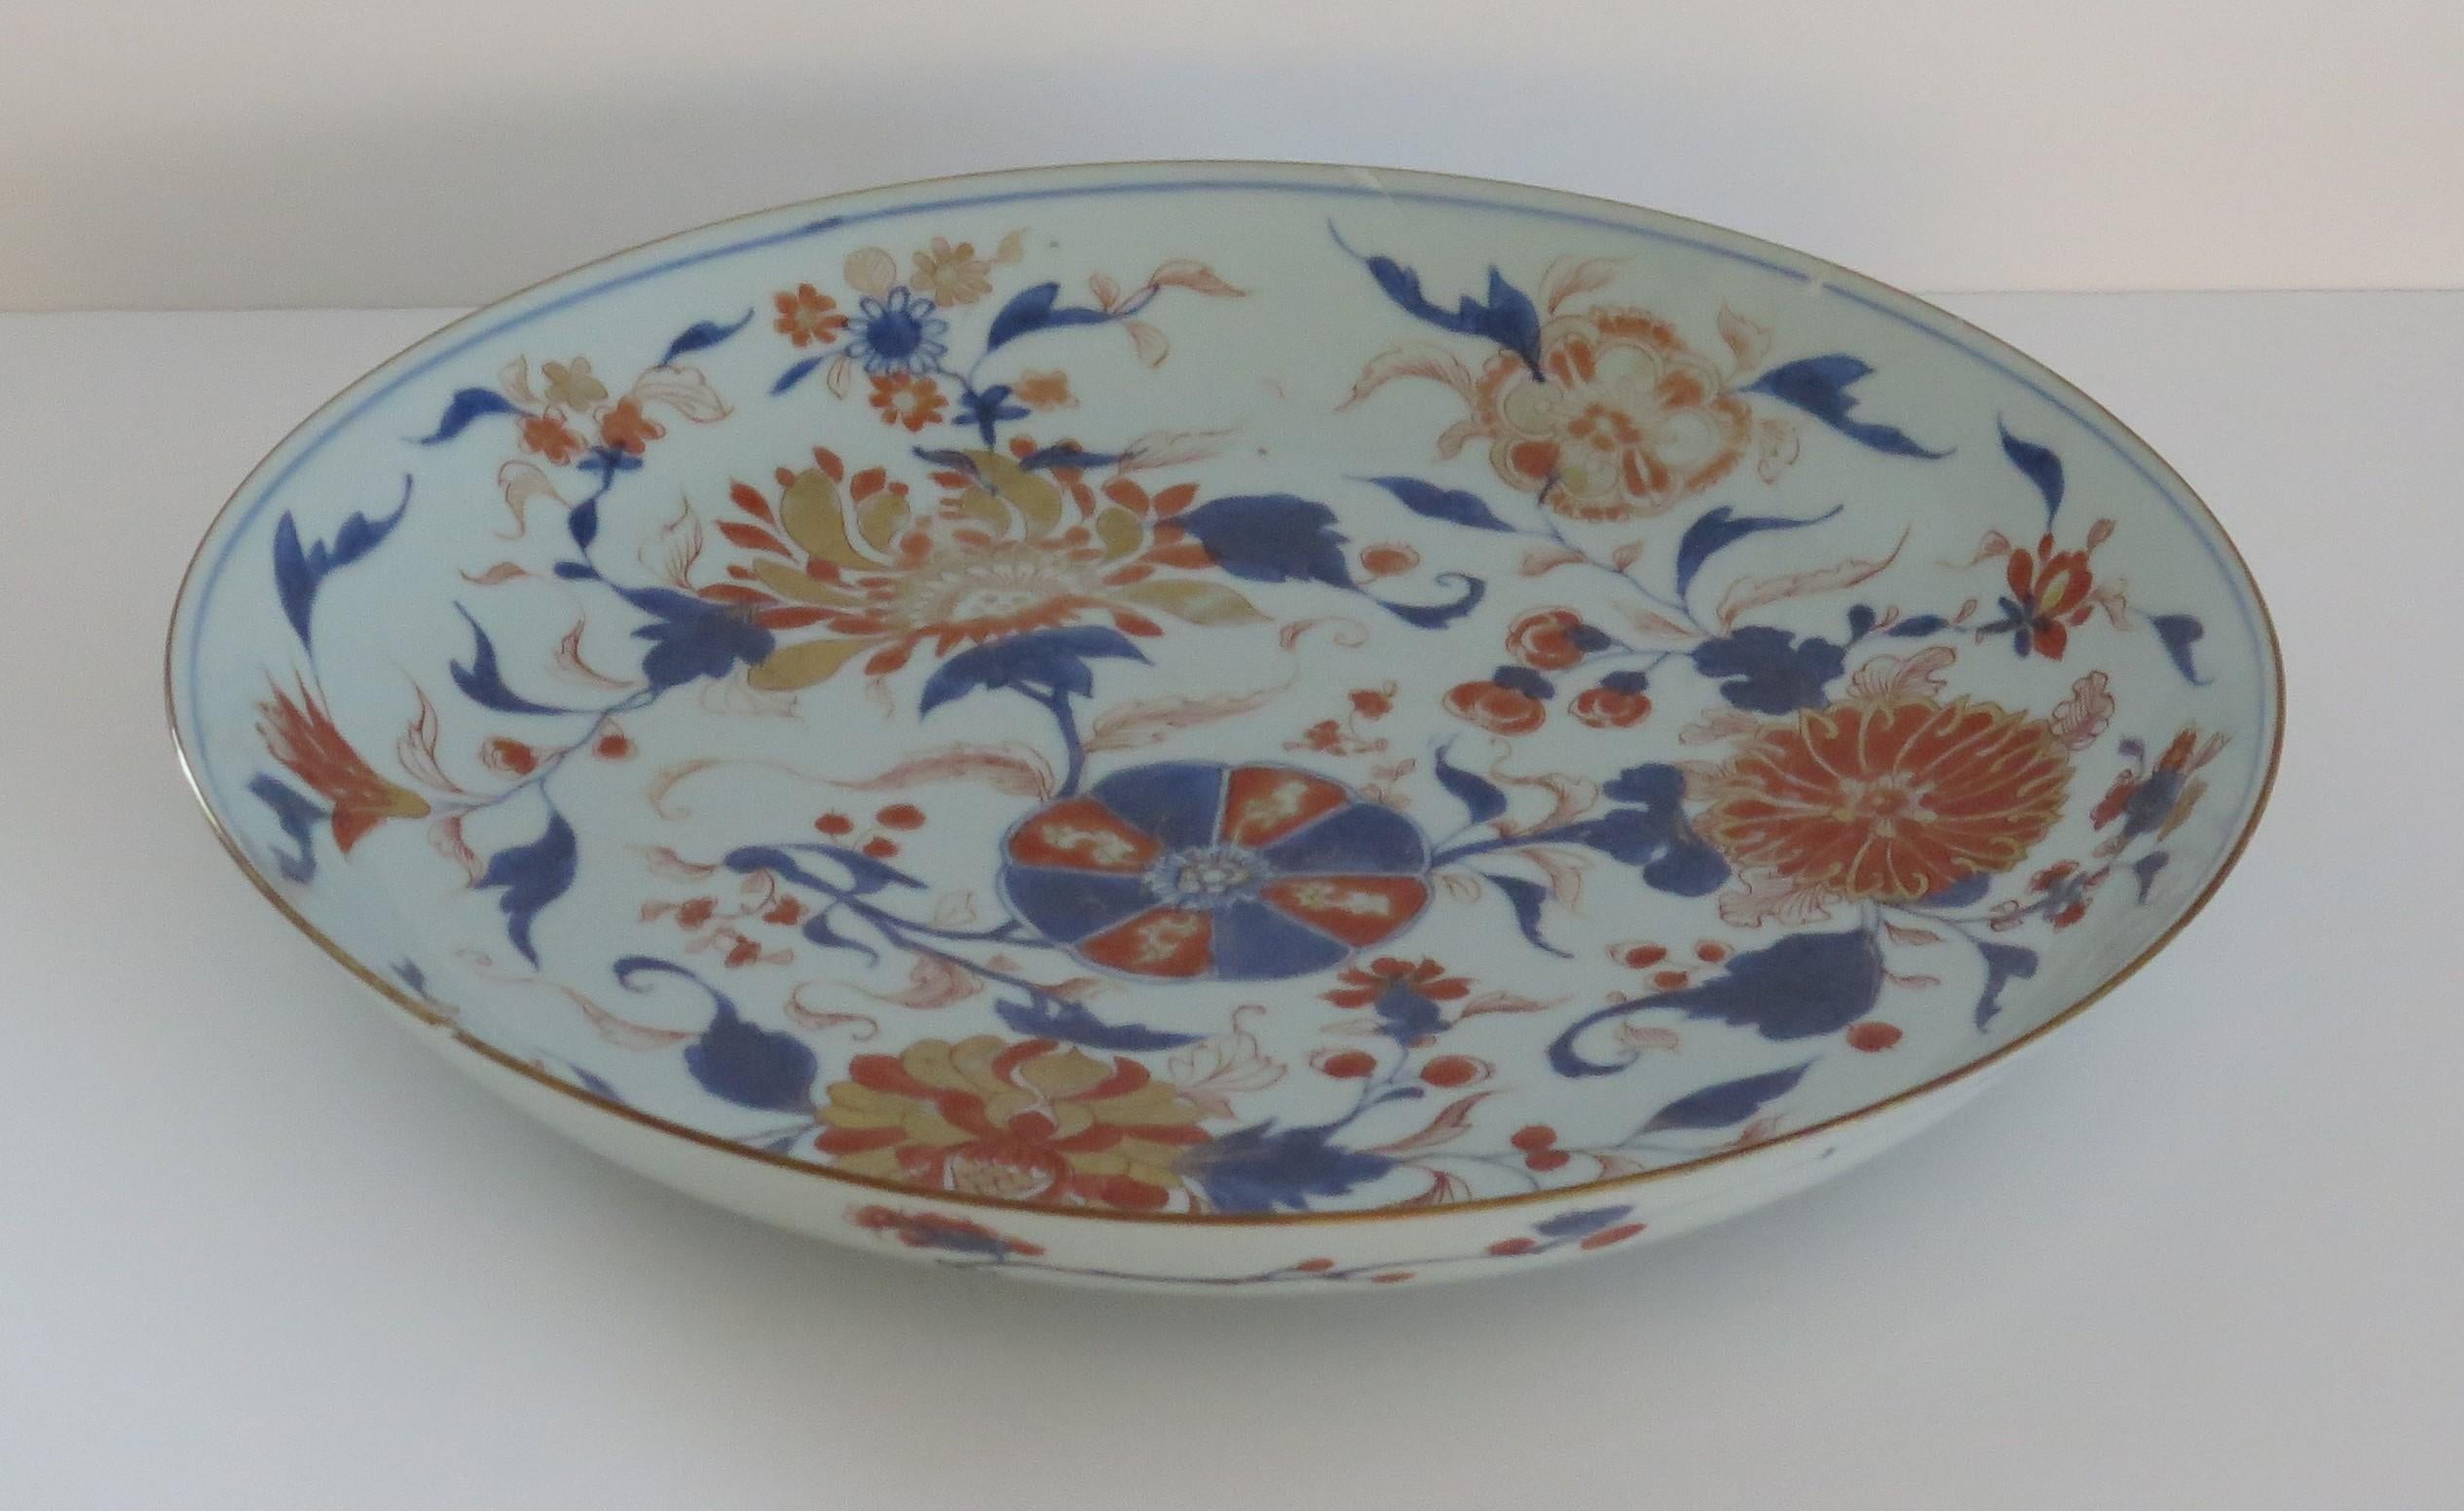 Qing Chinese Kangxi mark & period  Very Large Imari Dish or Plate Porcelain, Ca 1710 For Sale